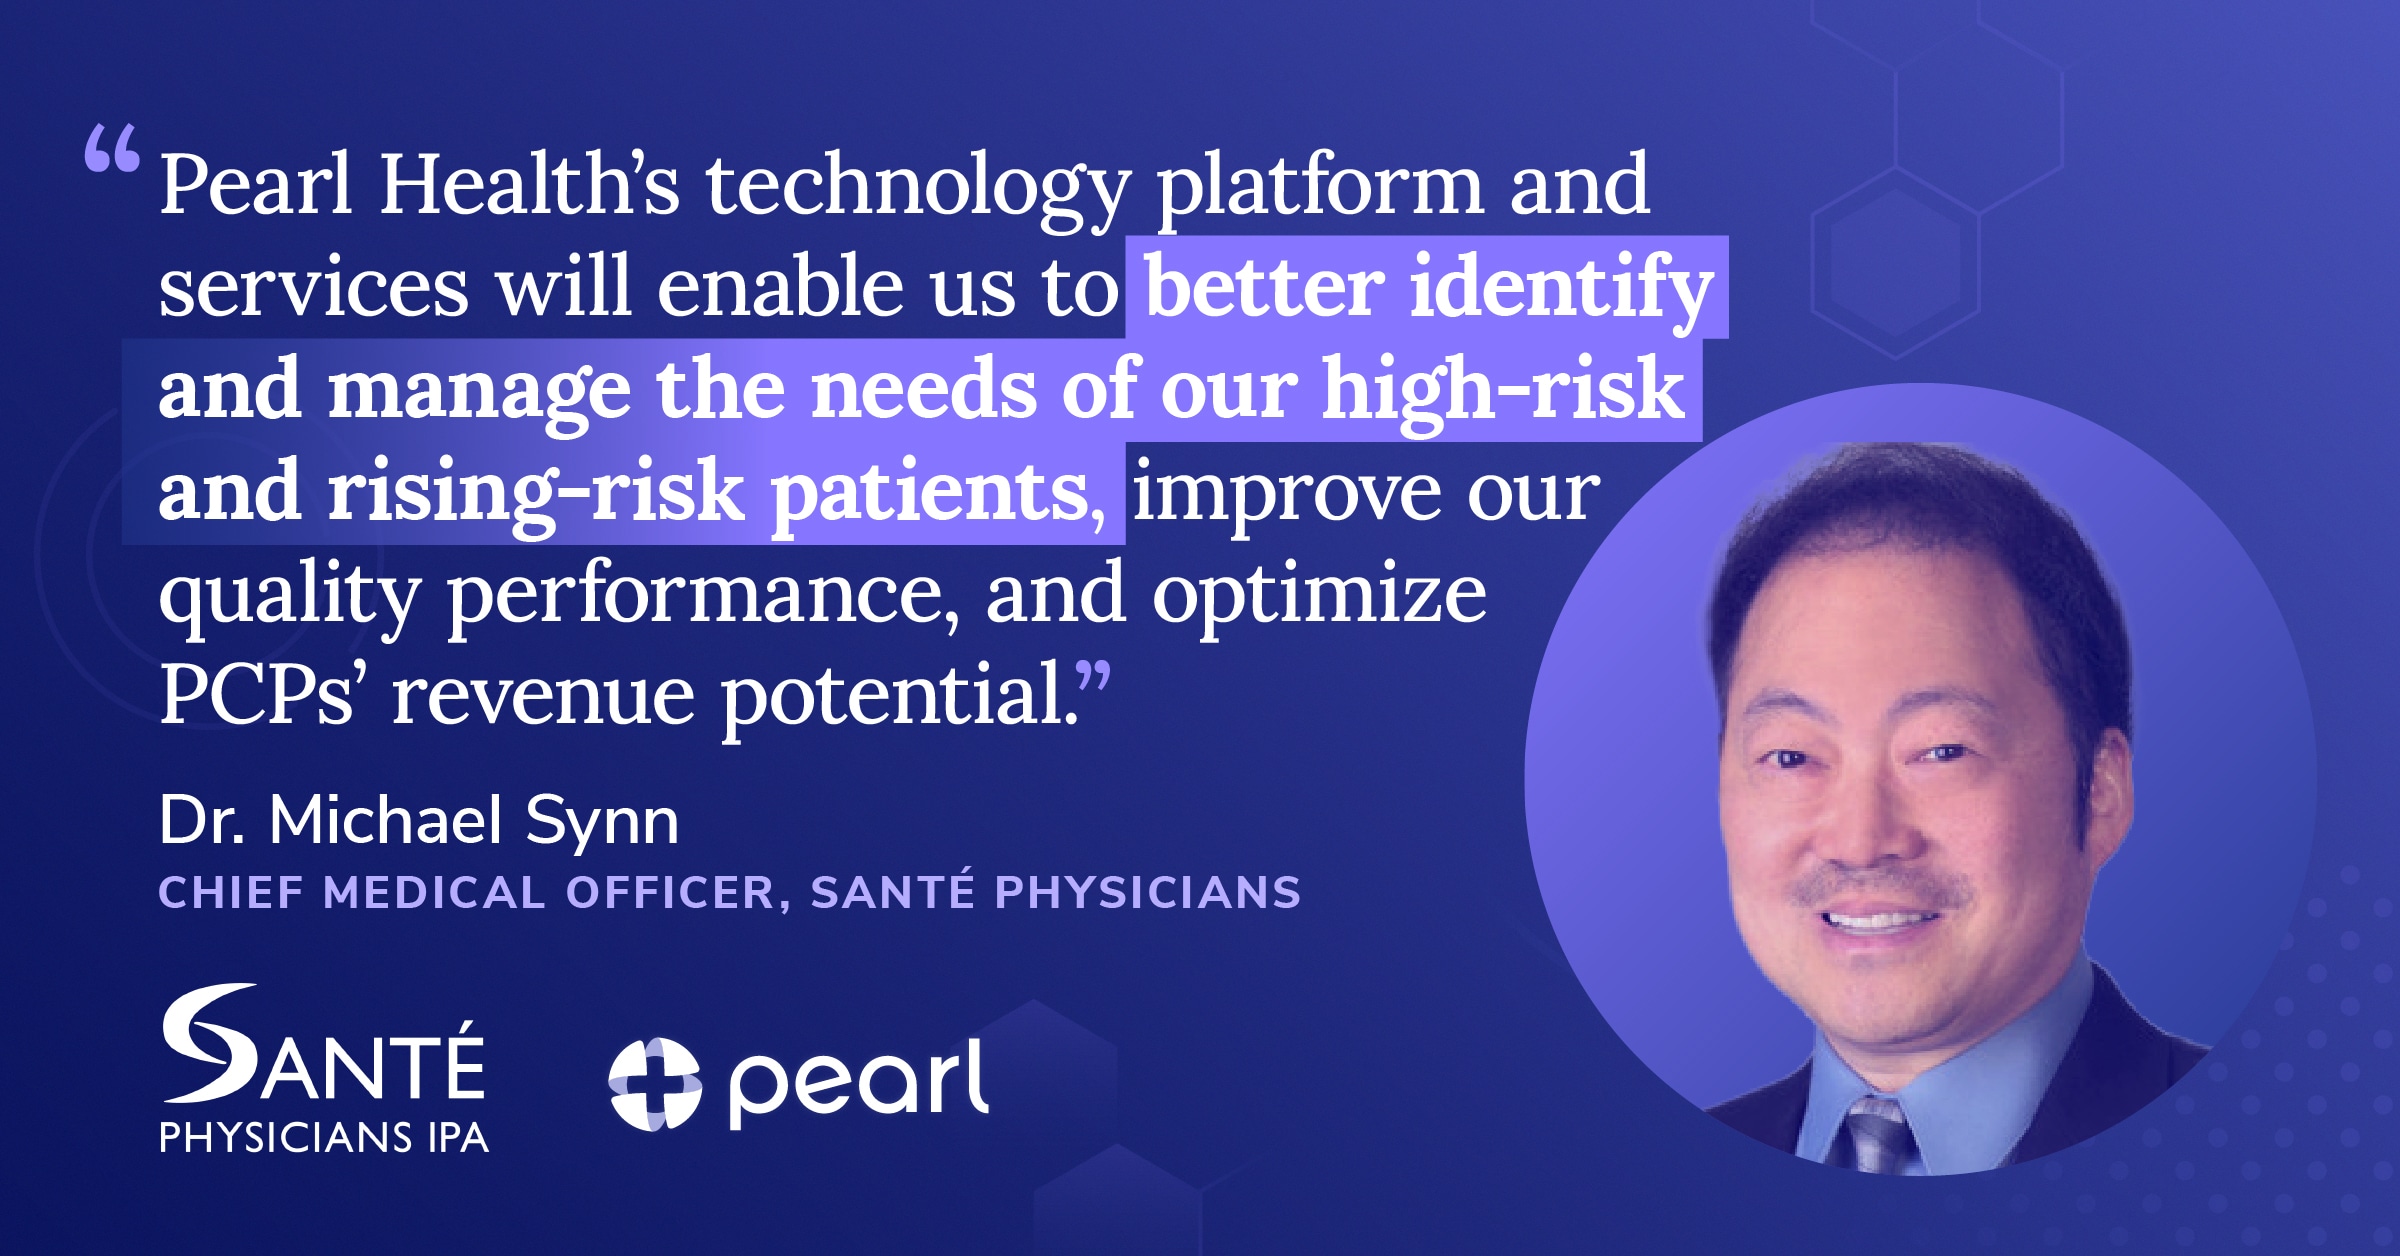 Pearl Health and Santé Physicians IPA Announce Partnership to Deliver Value-Based Care for Medicare Patients